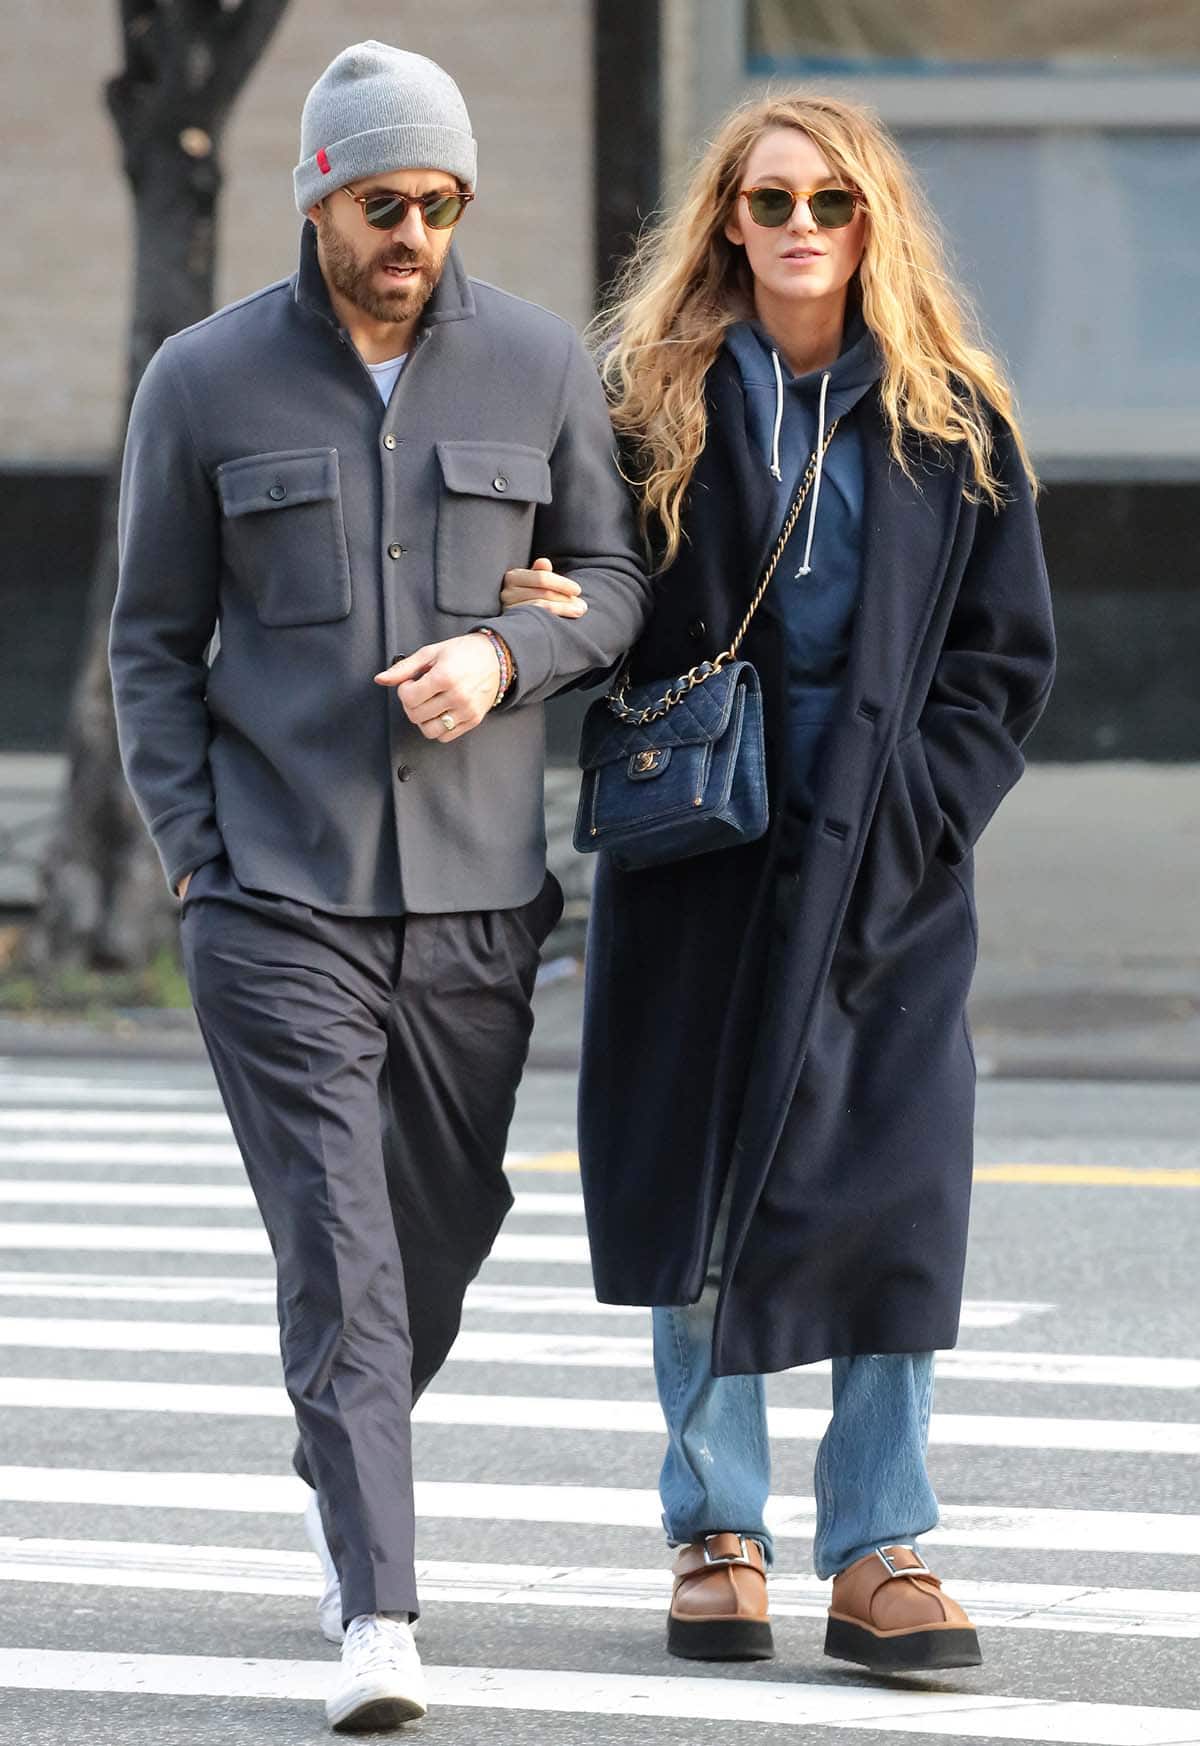 Ryan Reynolds and Blake Lively walk arm-in-arm in cozy fall outfits a day after Ryan Reynolds' 47th birthday on October 24, 2023